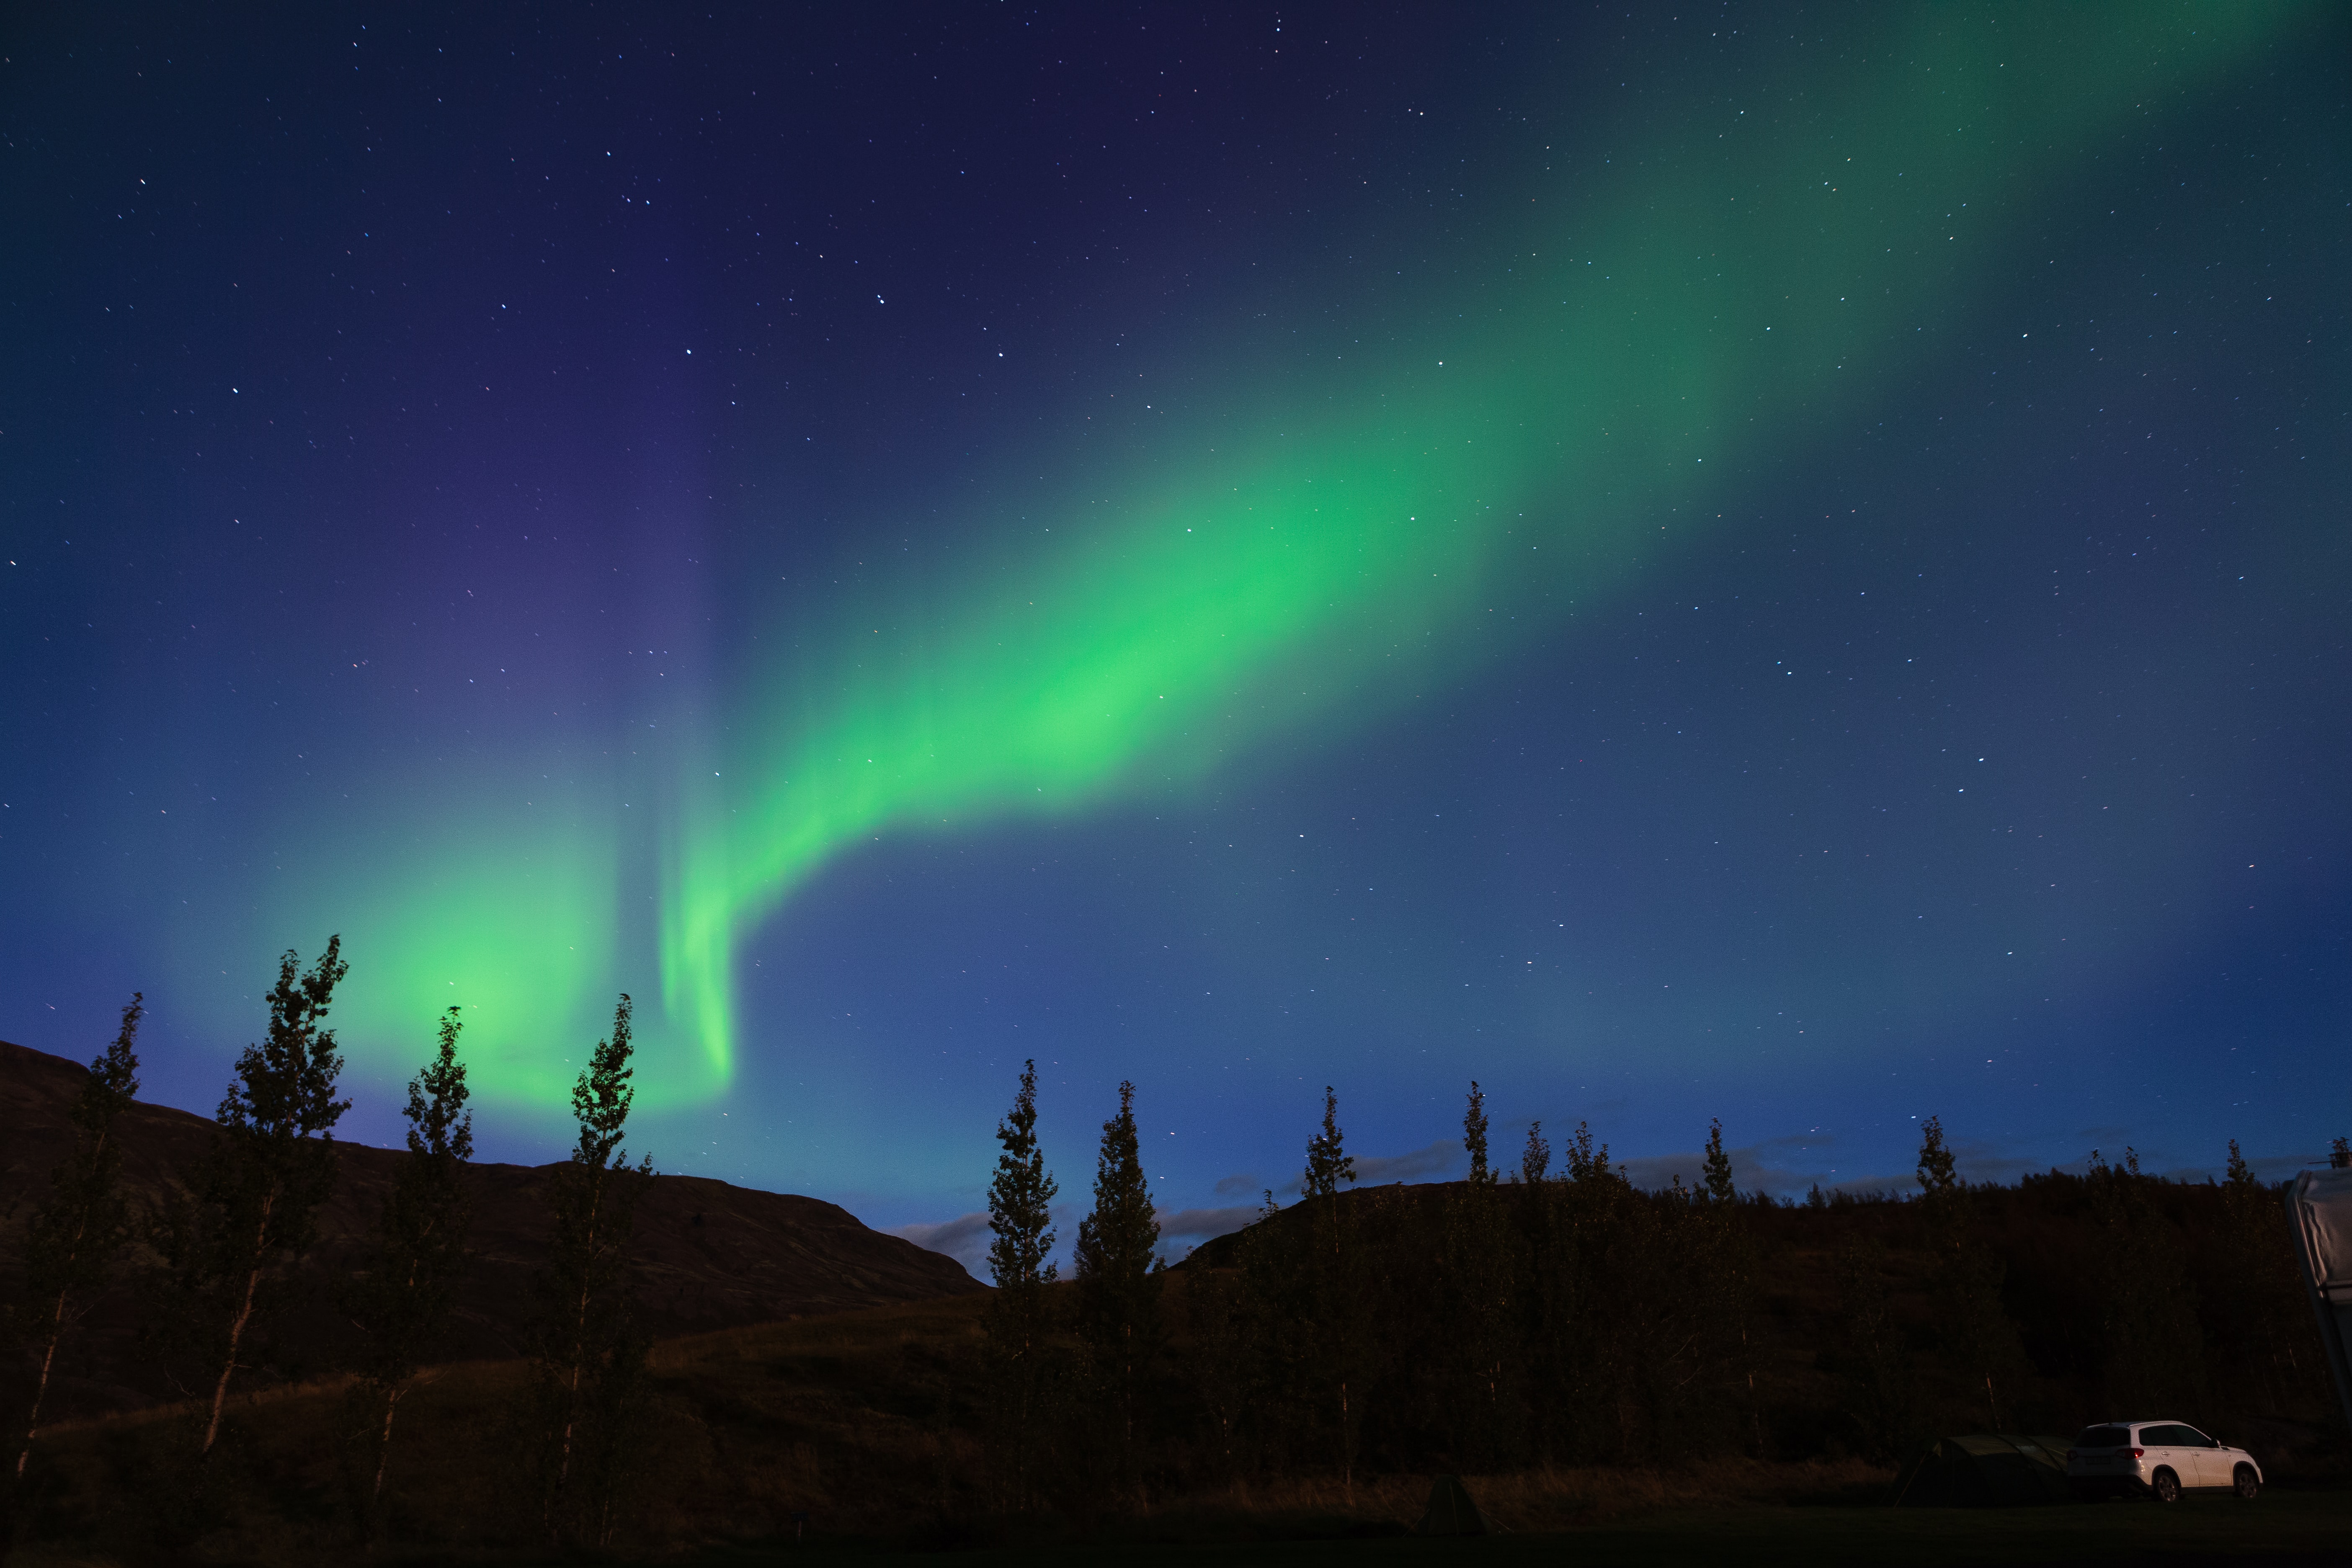 A green slightly curved aurora borealis over hills.